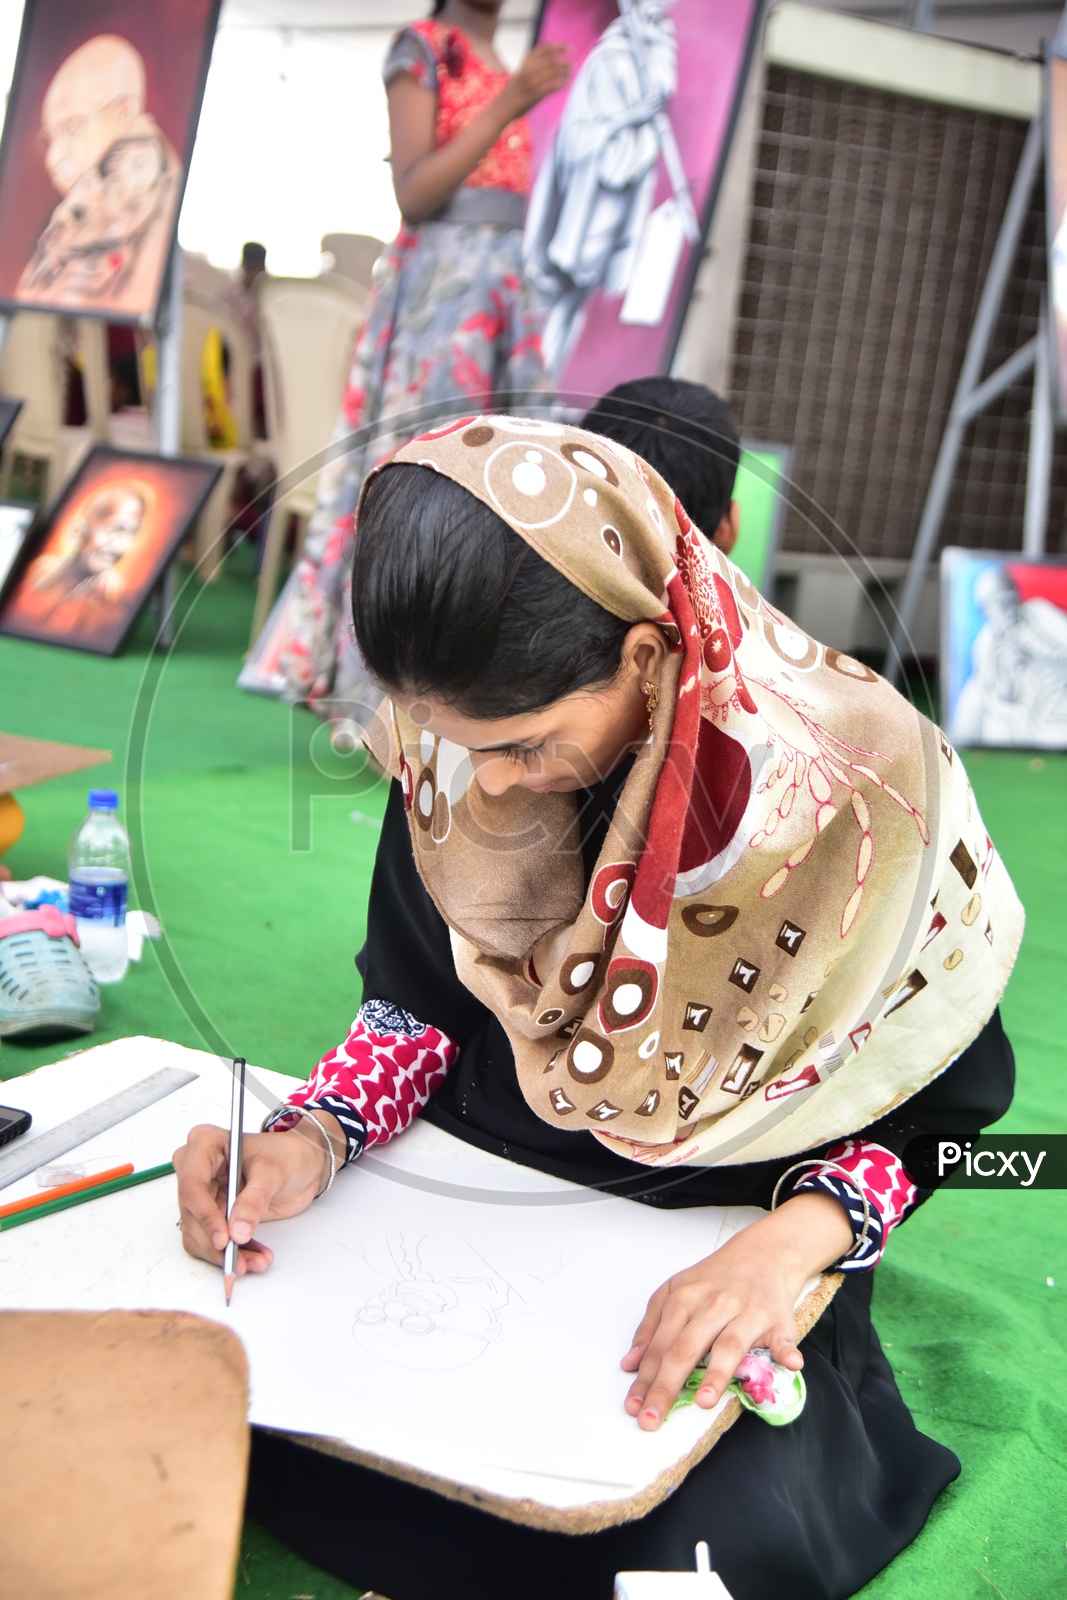 Muslim girl drawing a sketch during competition